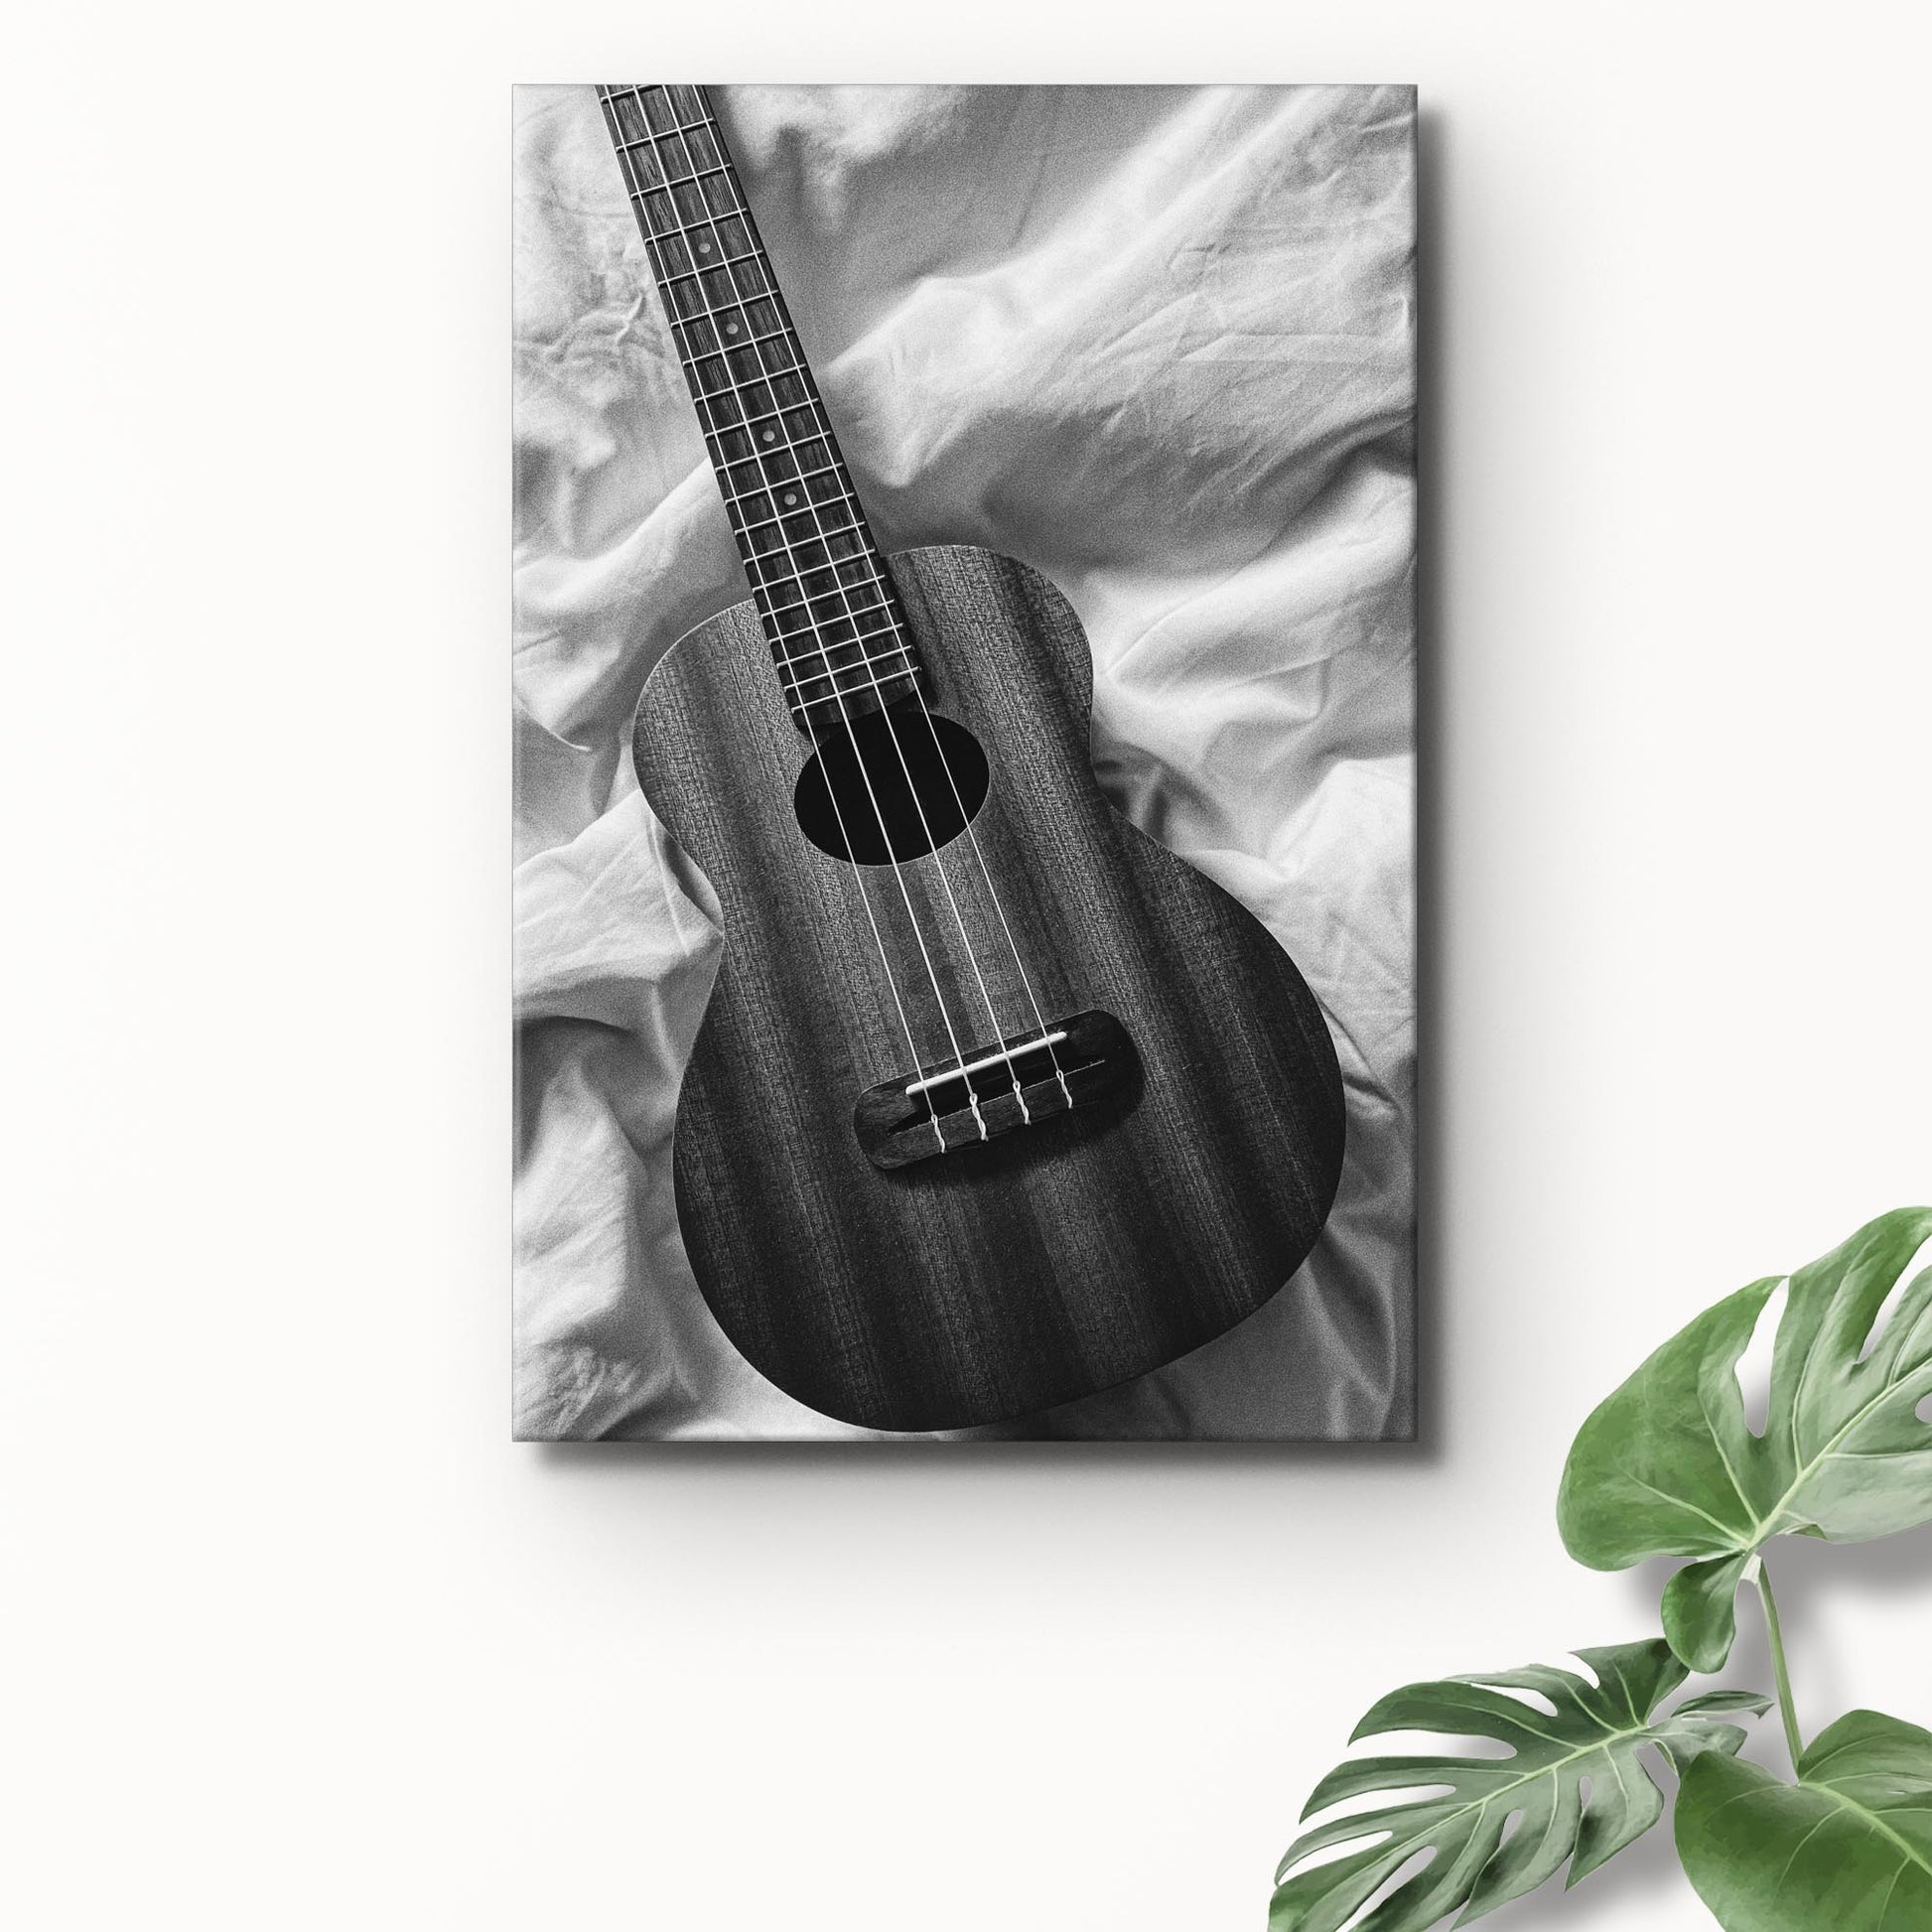 Ukulele Monochrome Canvas Wall Art Style 2 - Image by Tailored Canvases